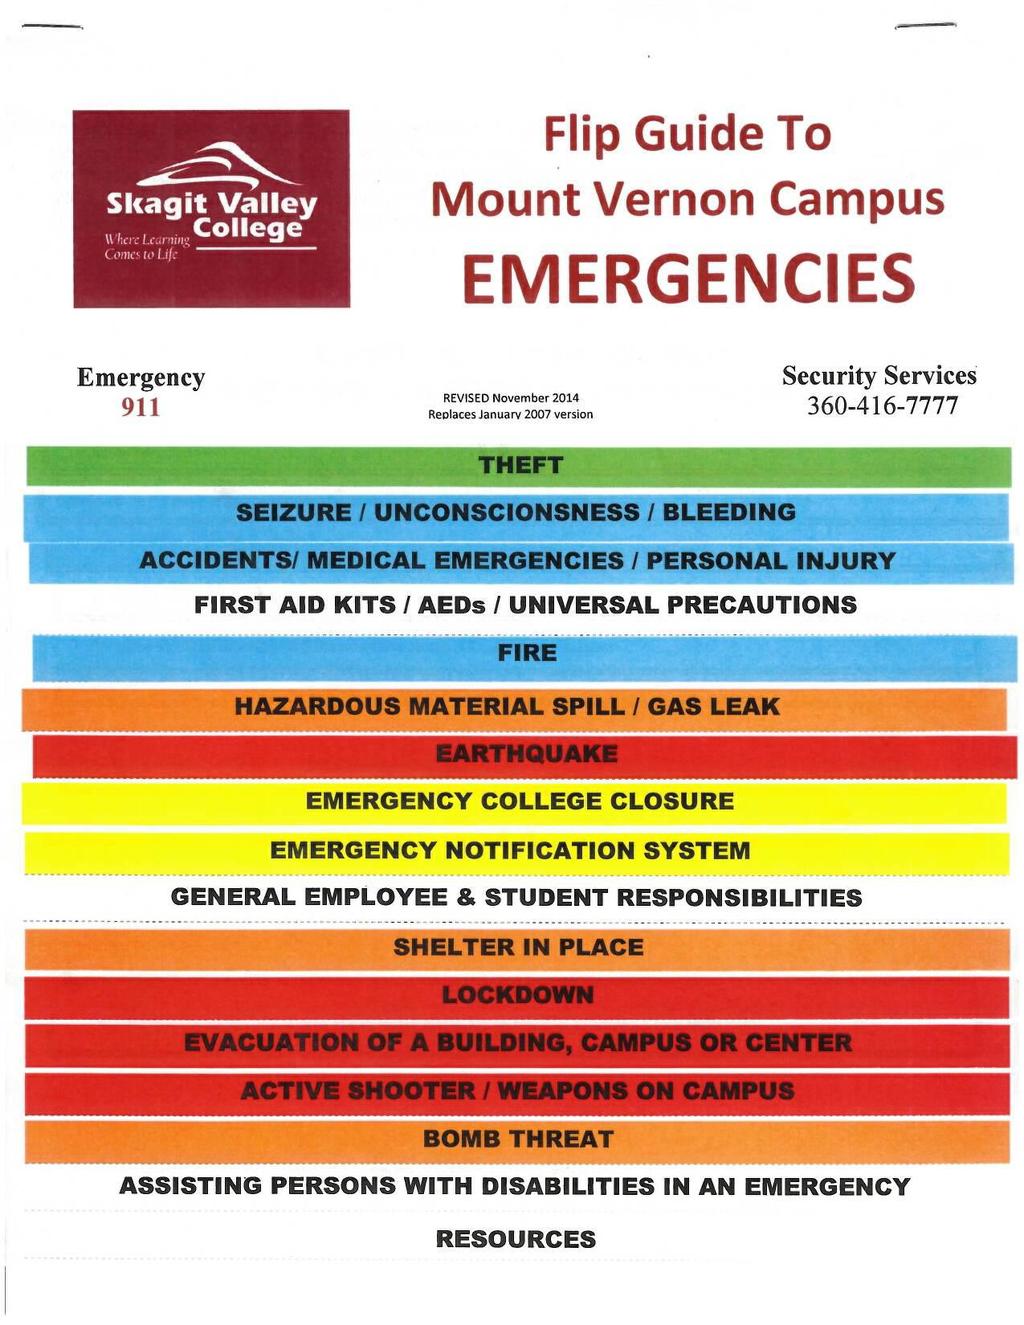 The following is the Skagit Valley College Flip Guide to Emergencies. This has been designed and reviewed for applicability at Skagit Valley College (Mount Vernon Campus).